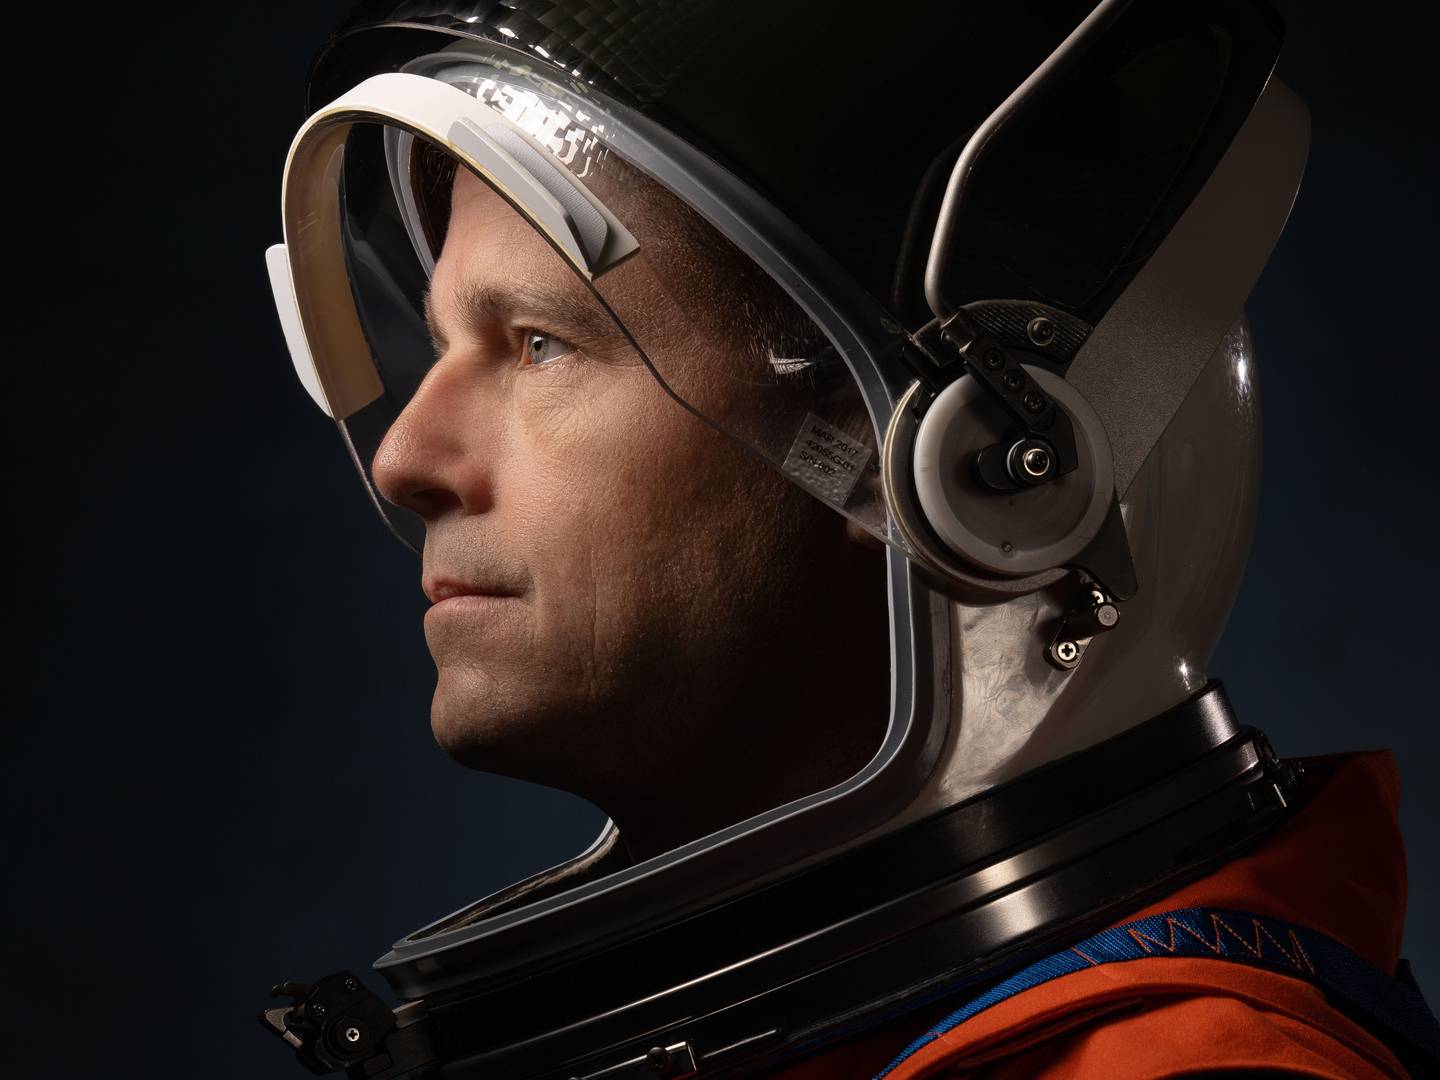 A middle-aged caucasian man wears an astronaut helmet with a visor lifted up and looks off to the left in a portrait against a black background.